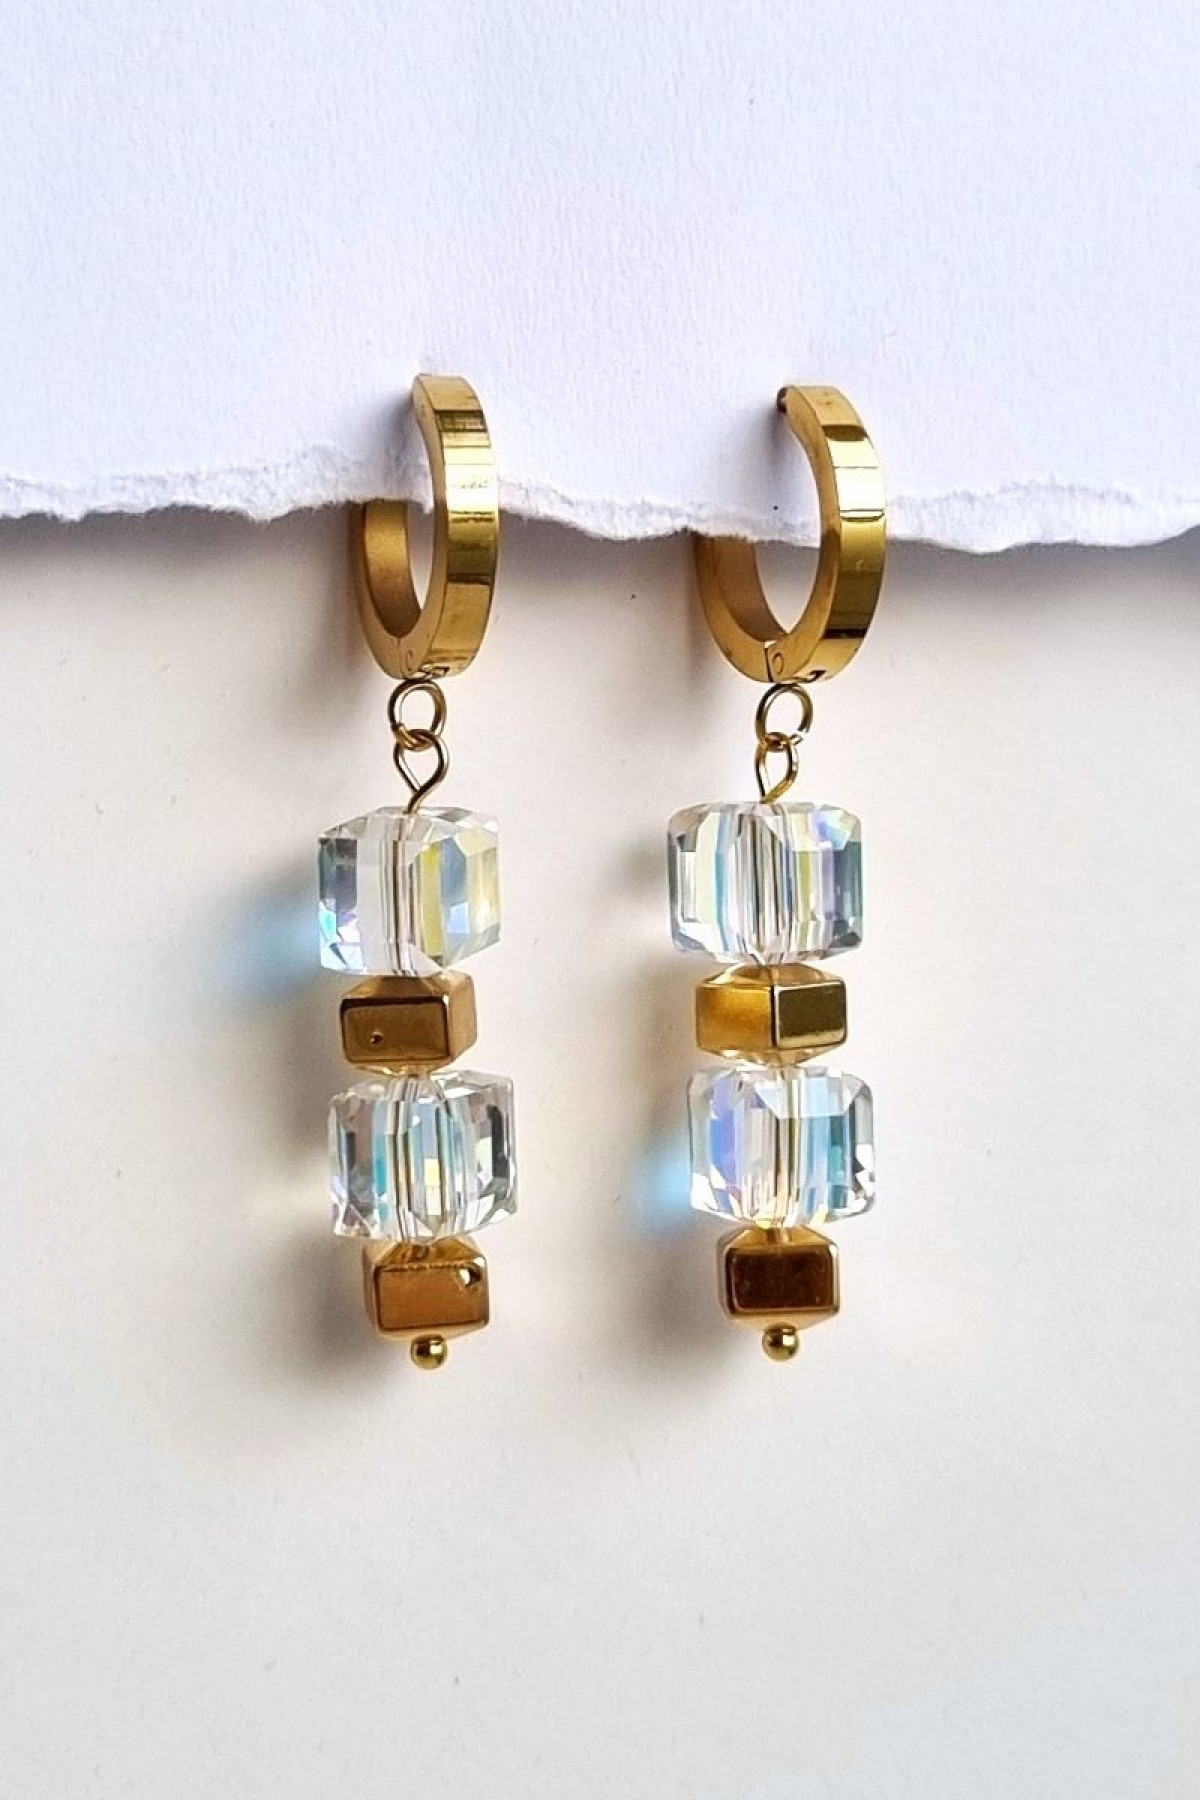 EARRINGS WITH CRYSTALS by Eve Kay